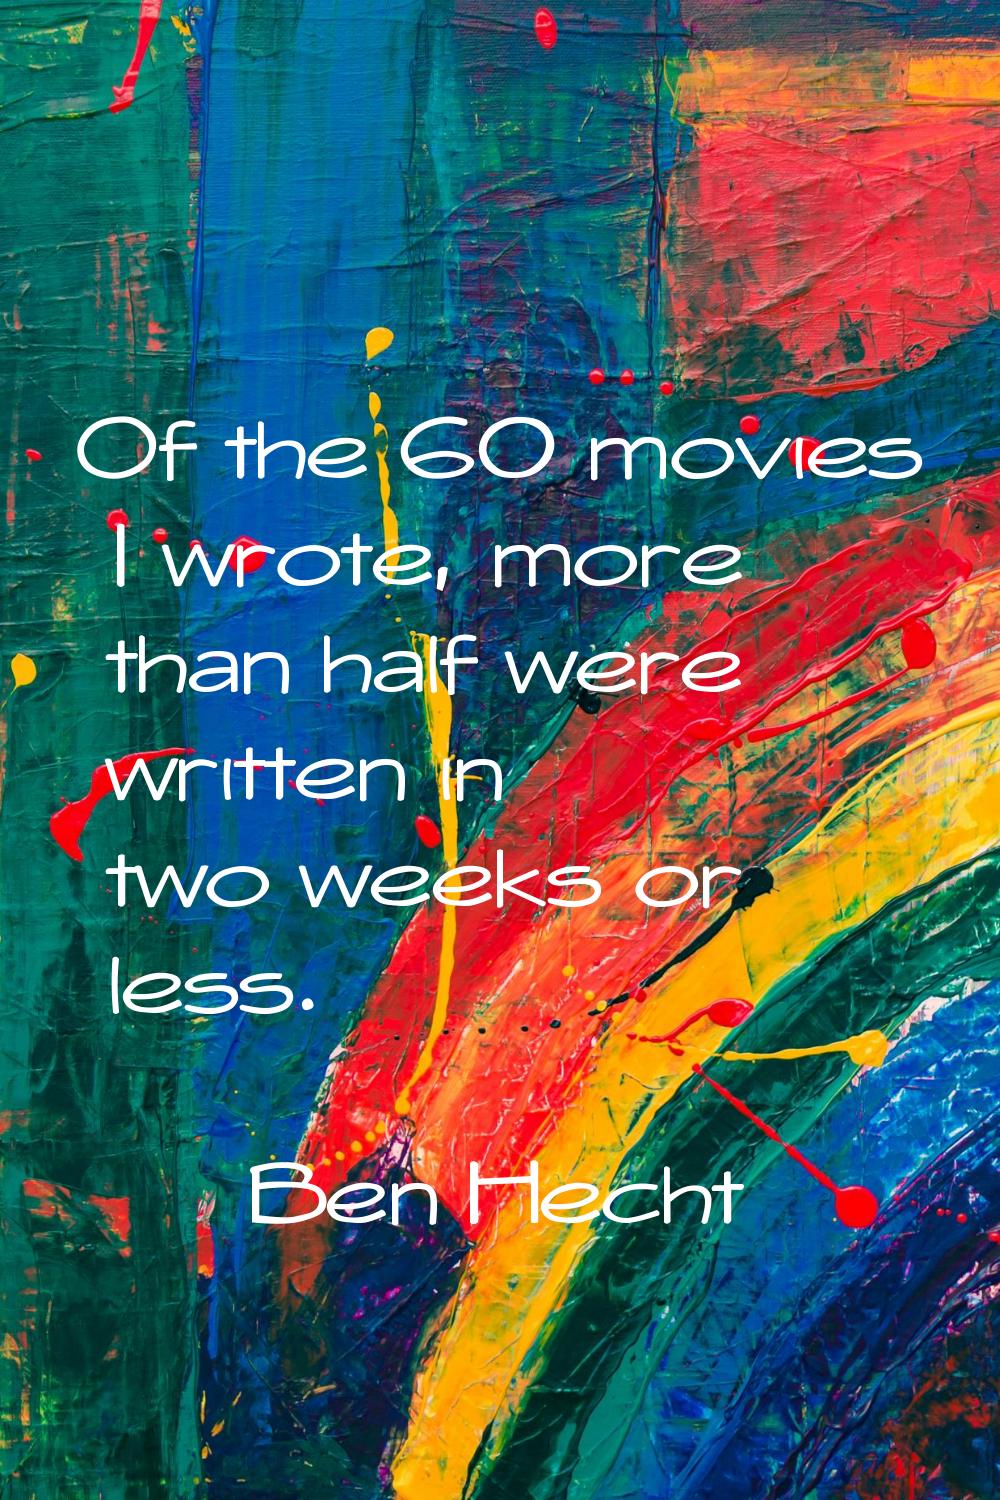 Of the 60 movies I wrote, more than half were written in two weeks or less.